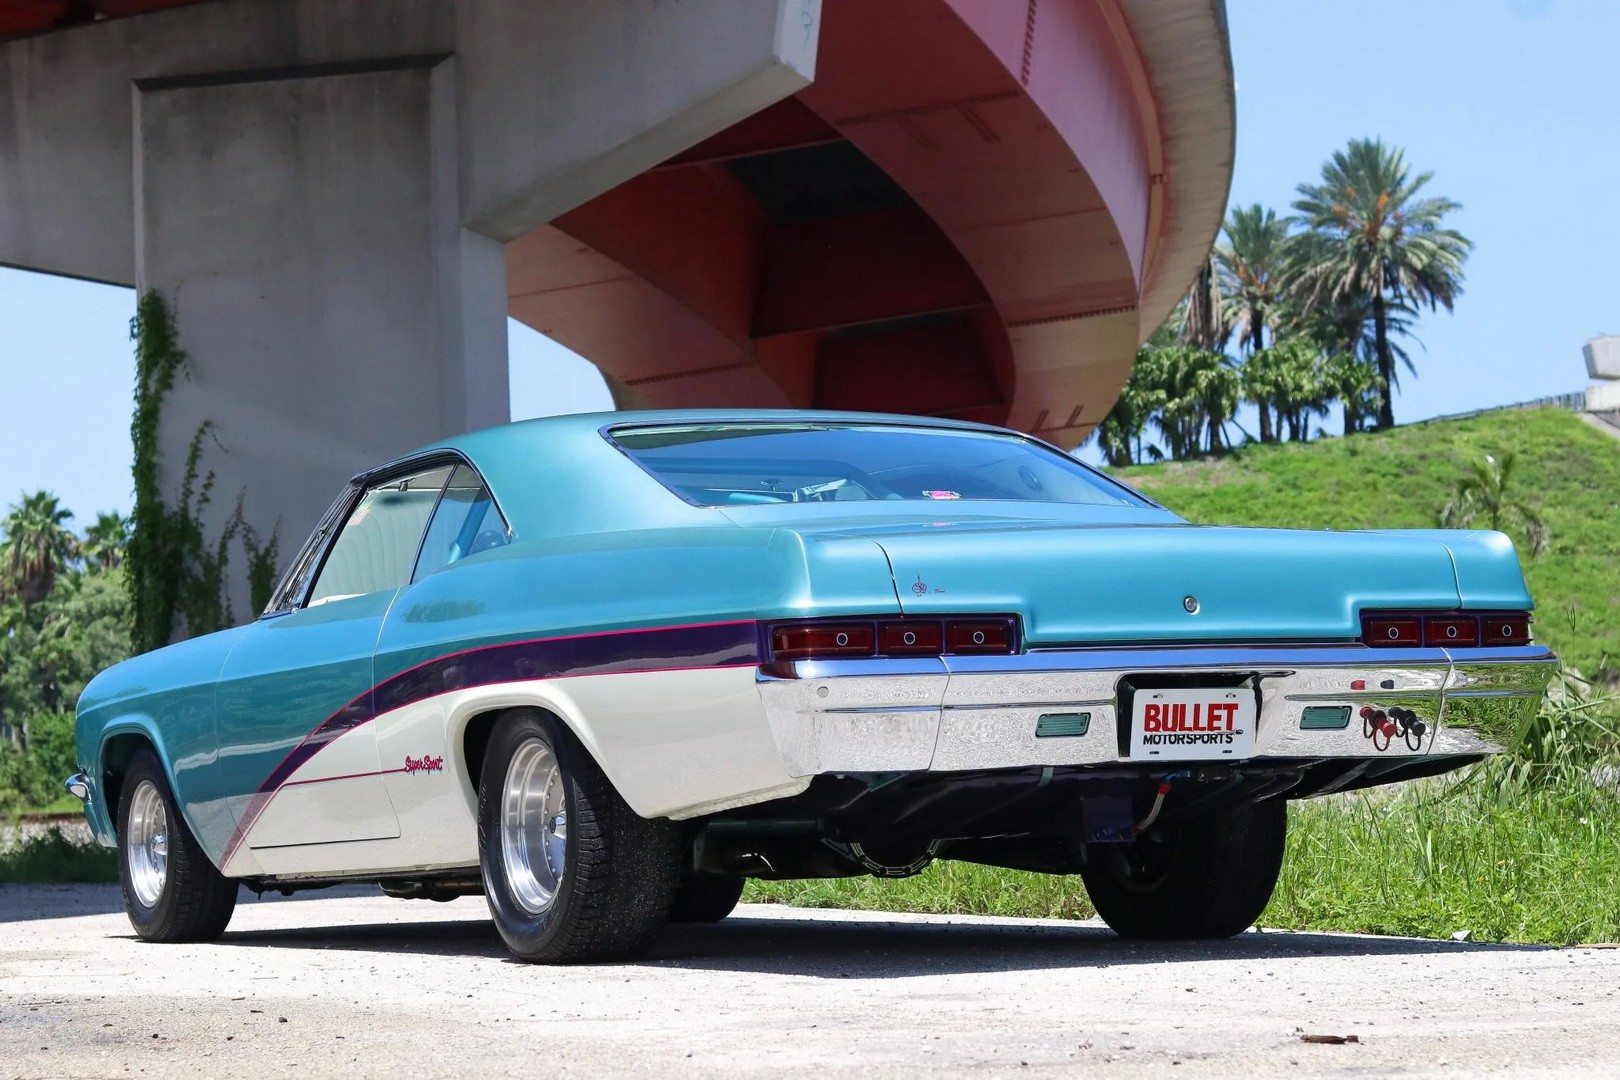 Reviving Classic Cool: Dive into the 1966 Chevy Impala SS 396 Build Review